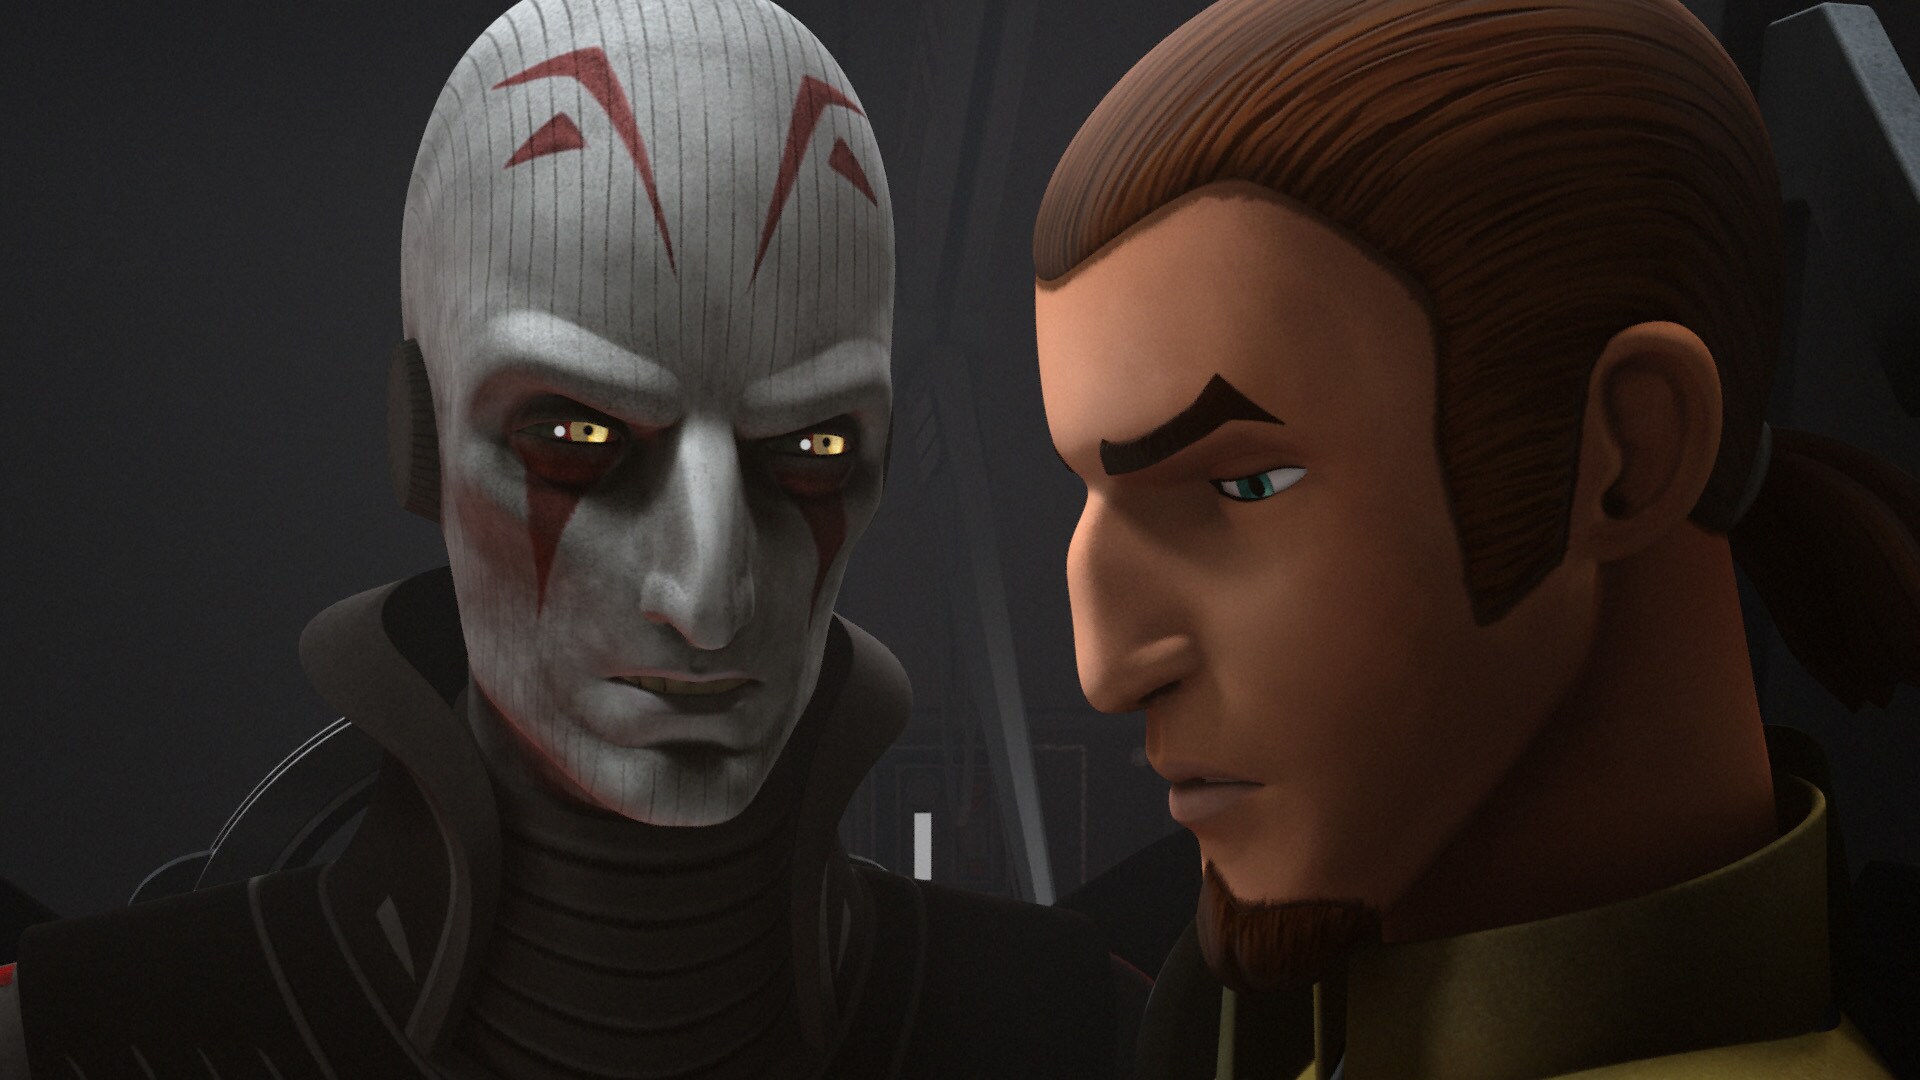 Meanwhile, the Inquisitor continues torturing and interrogating Kanan. He wants to know about Ful...